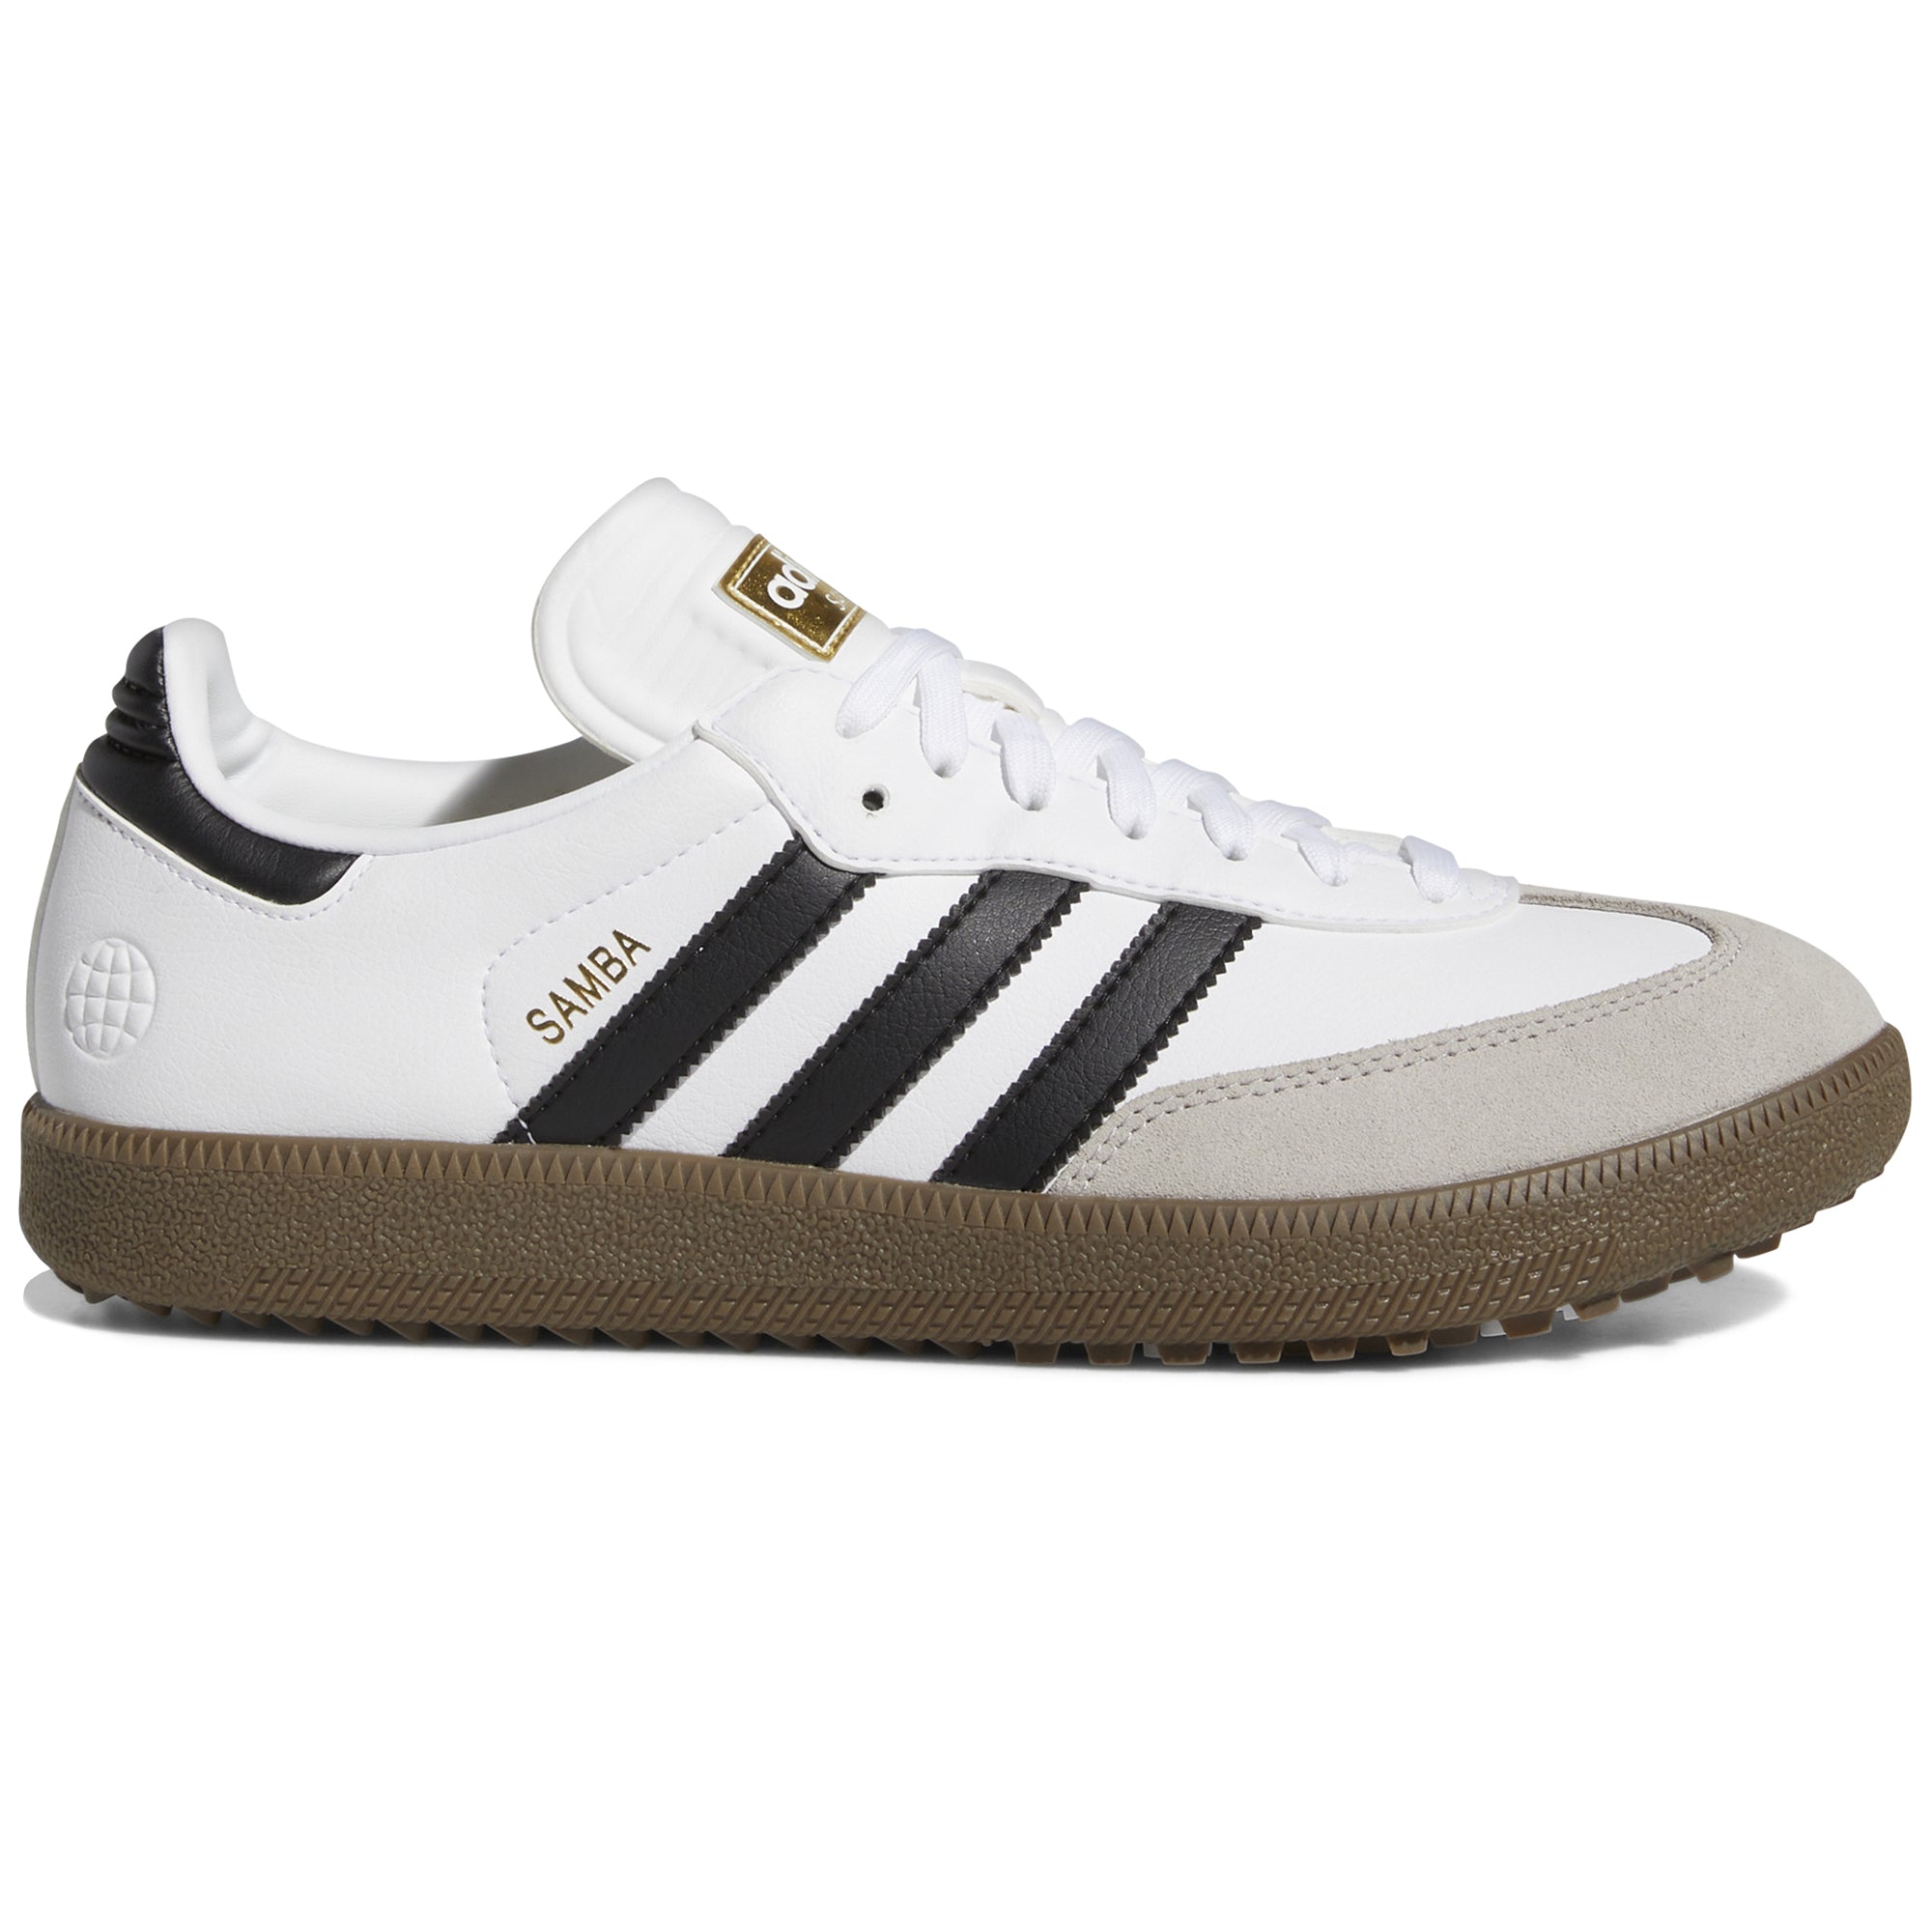 adidas Samba Spikeless LE Golf Shoes HP7879 White Black Gum 5 | Function18  | Restrictedgs